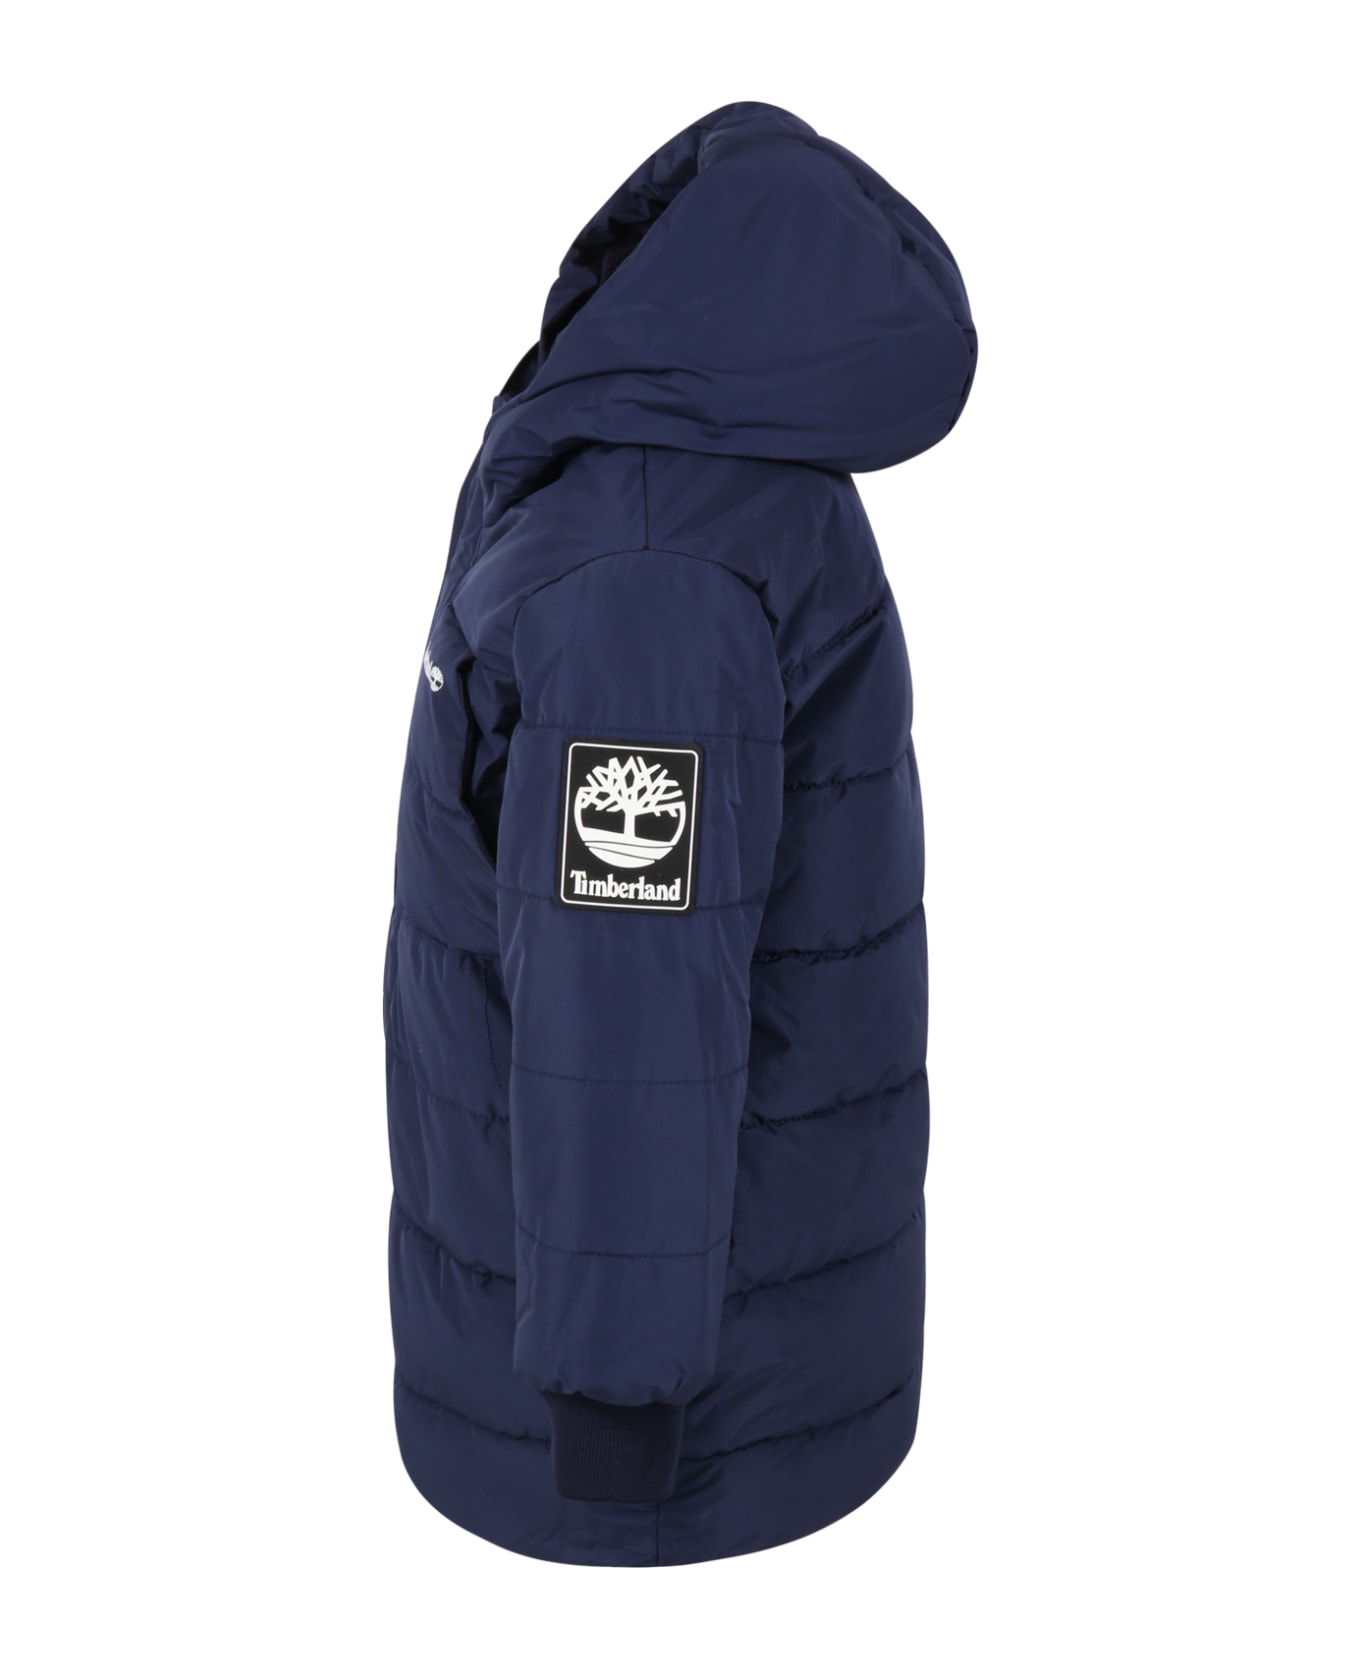 Timberland Blue Jacket For Boy With Logo - Blue